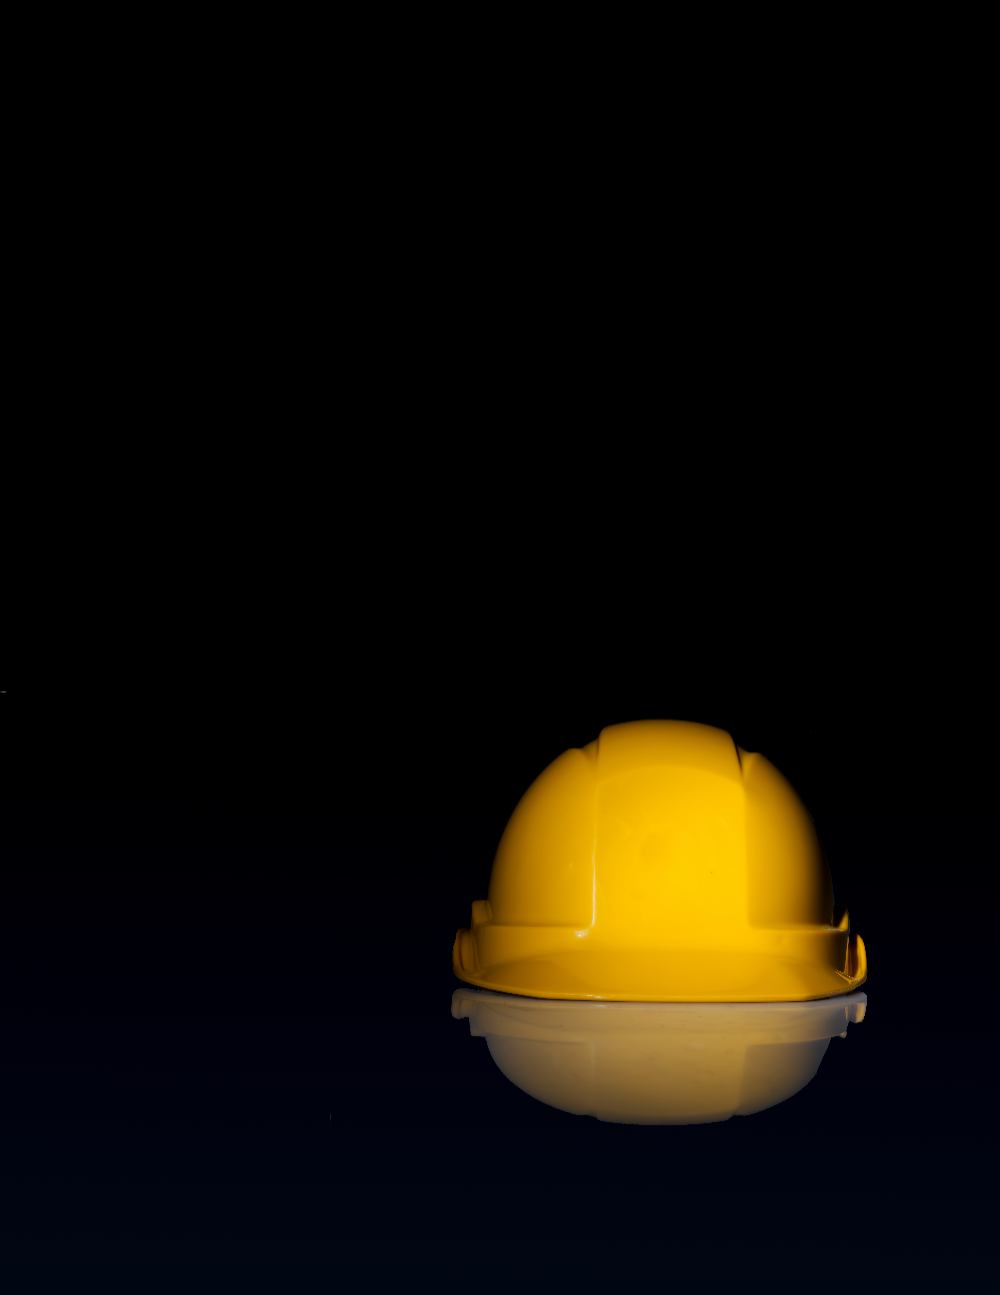 A hard hat placed on a dark, shiny surface.